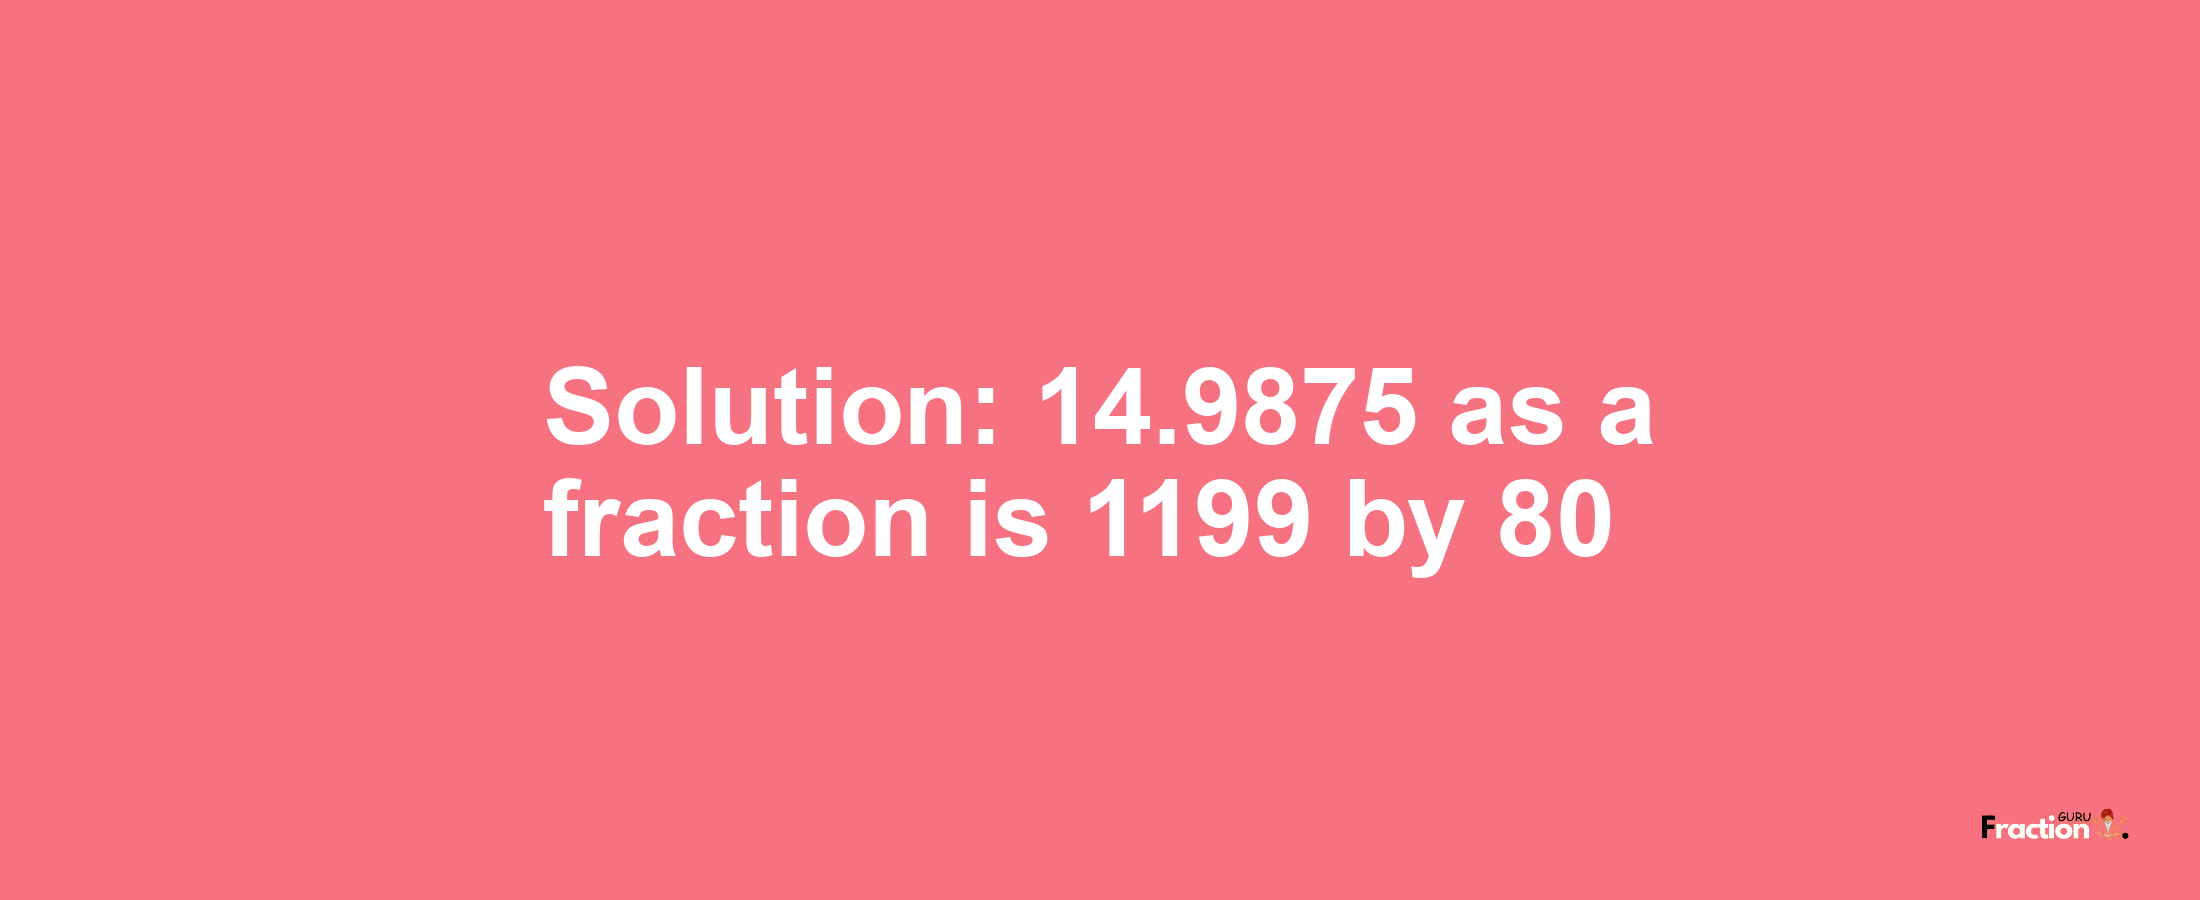 Solution:14.9875 as a fraction is 1199/80